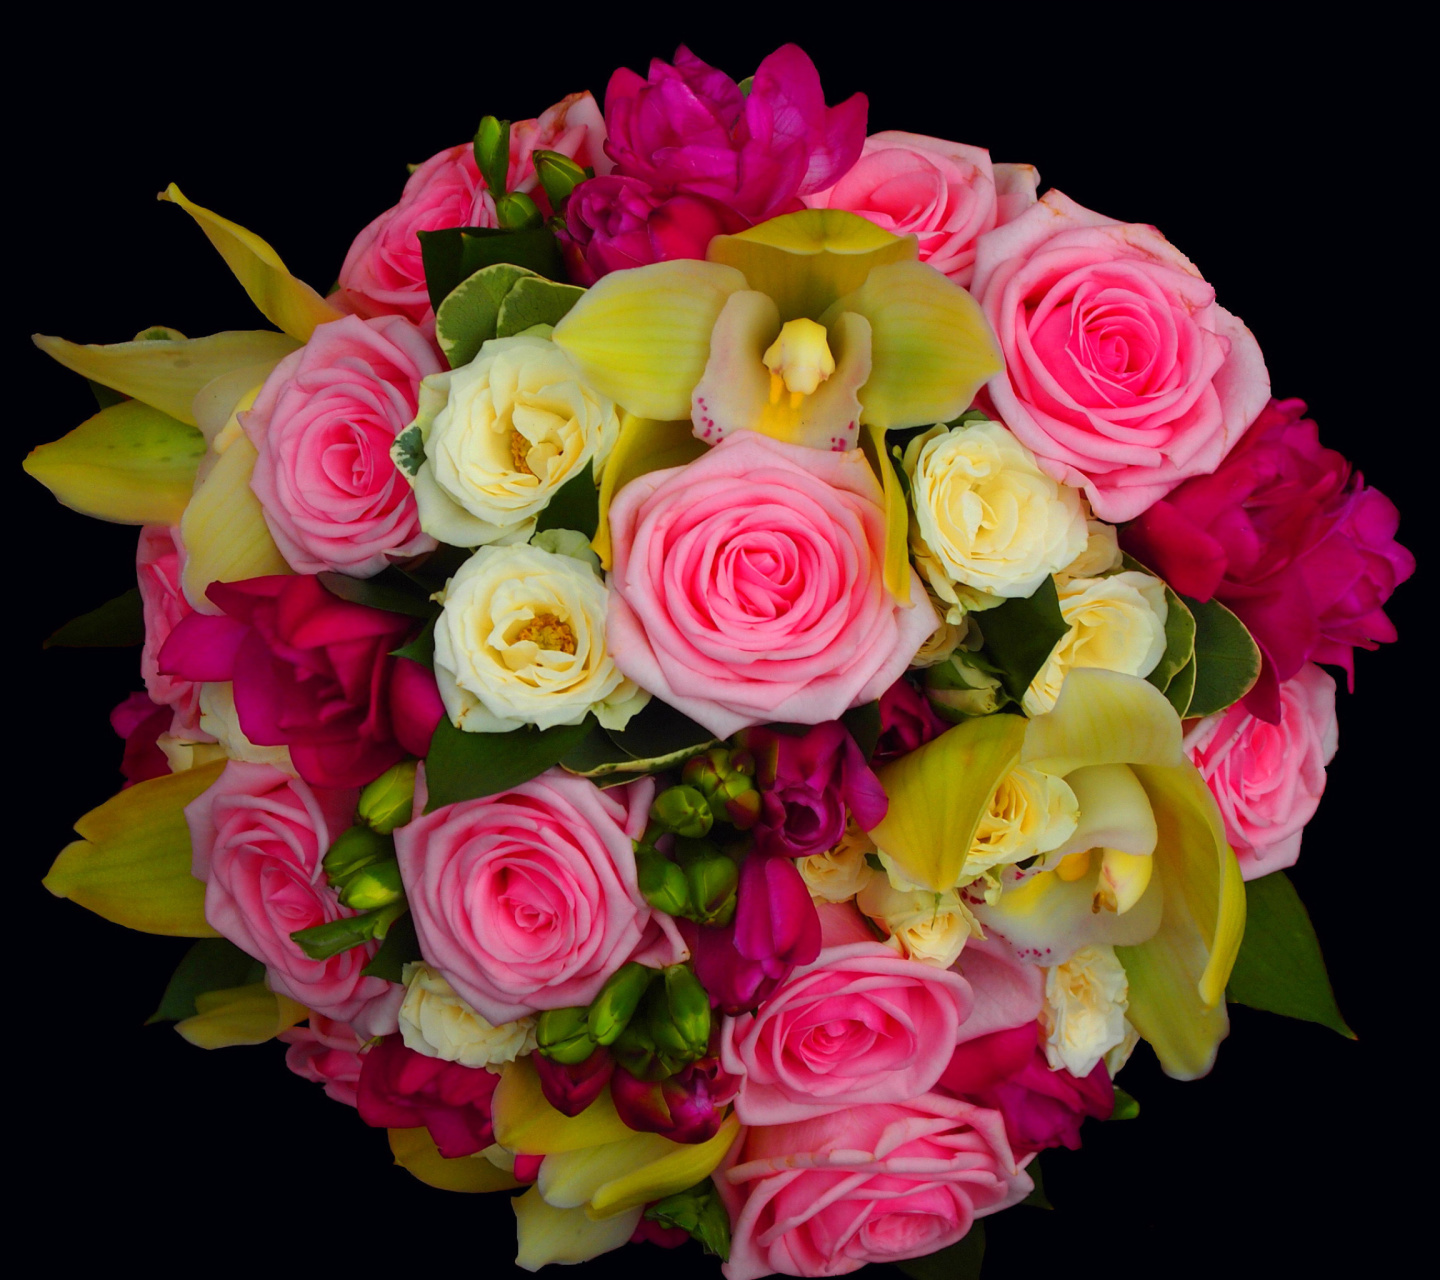 Das Bouquet of roses and yellow orchid, floristry Wallpaper 1440x1280